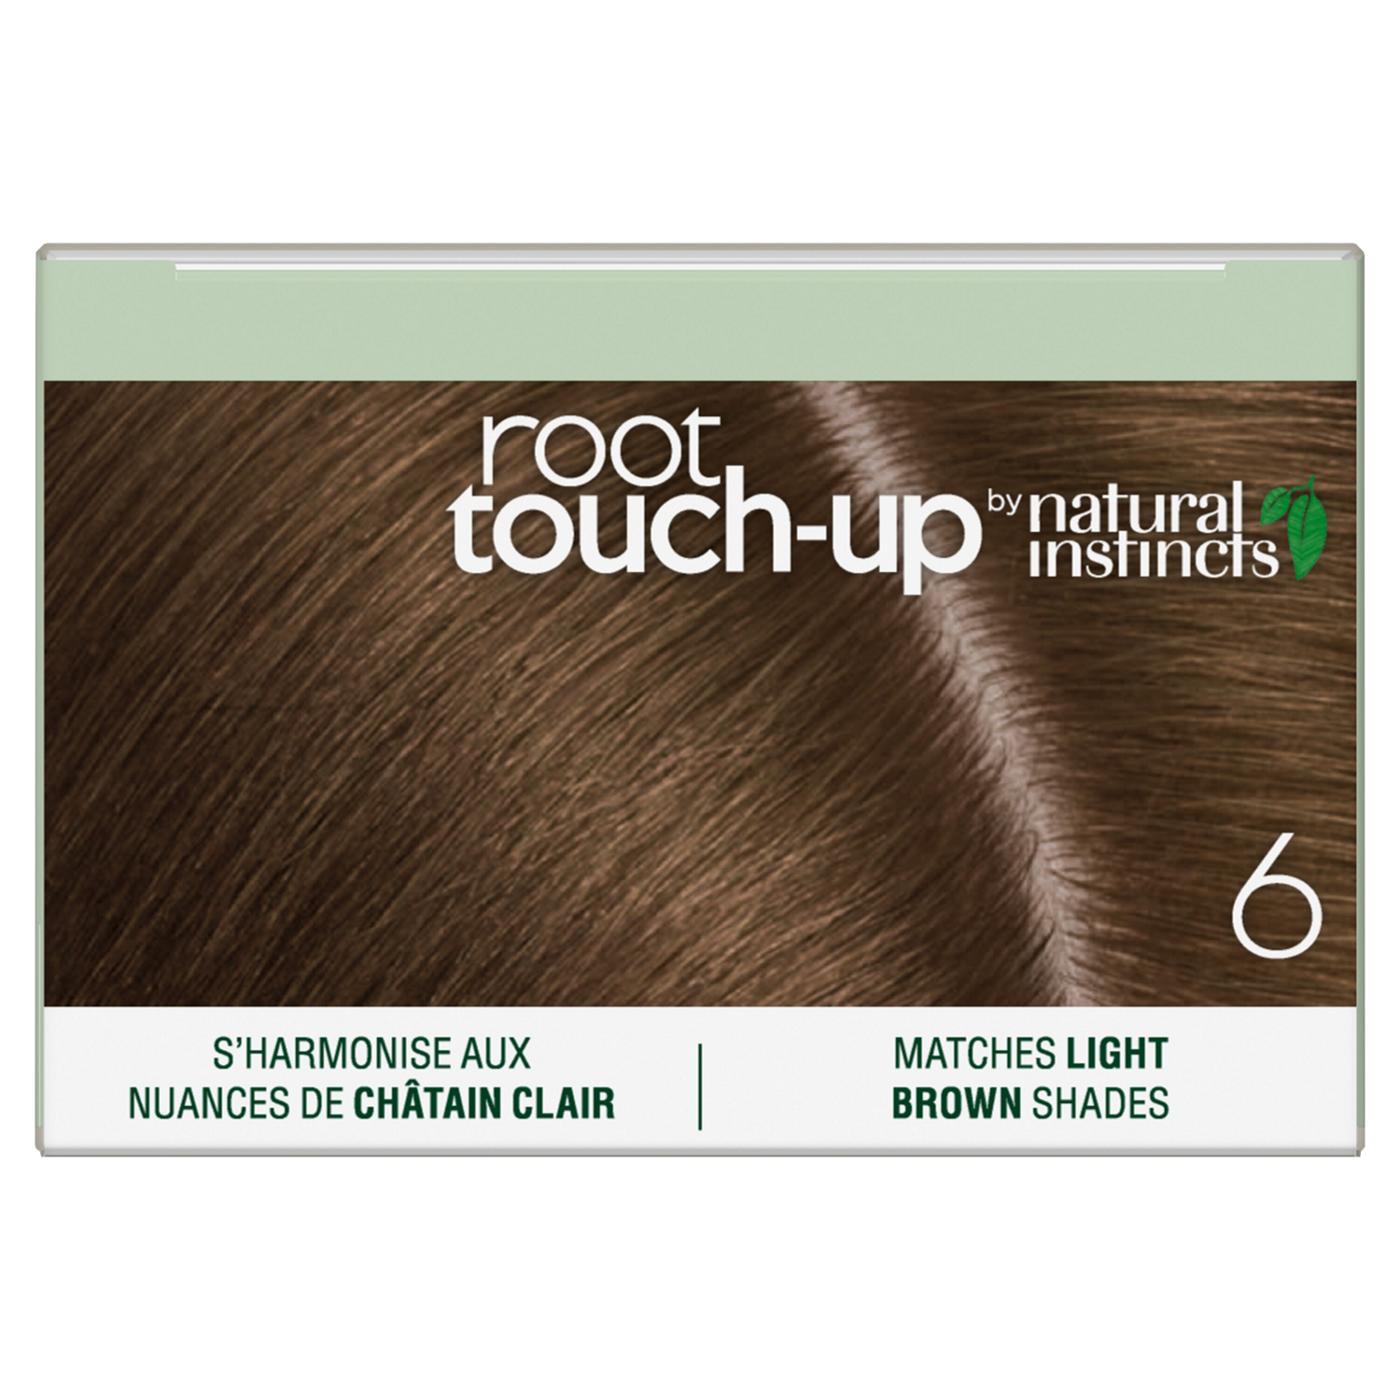 Clairol Root Touch-Up Natural Instincts Permanent Hair Color 6 Matches Light Brown Shades; image 5 of 5